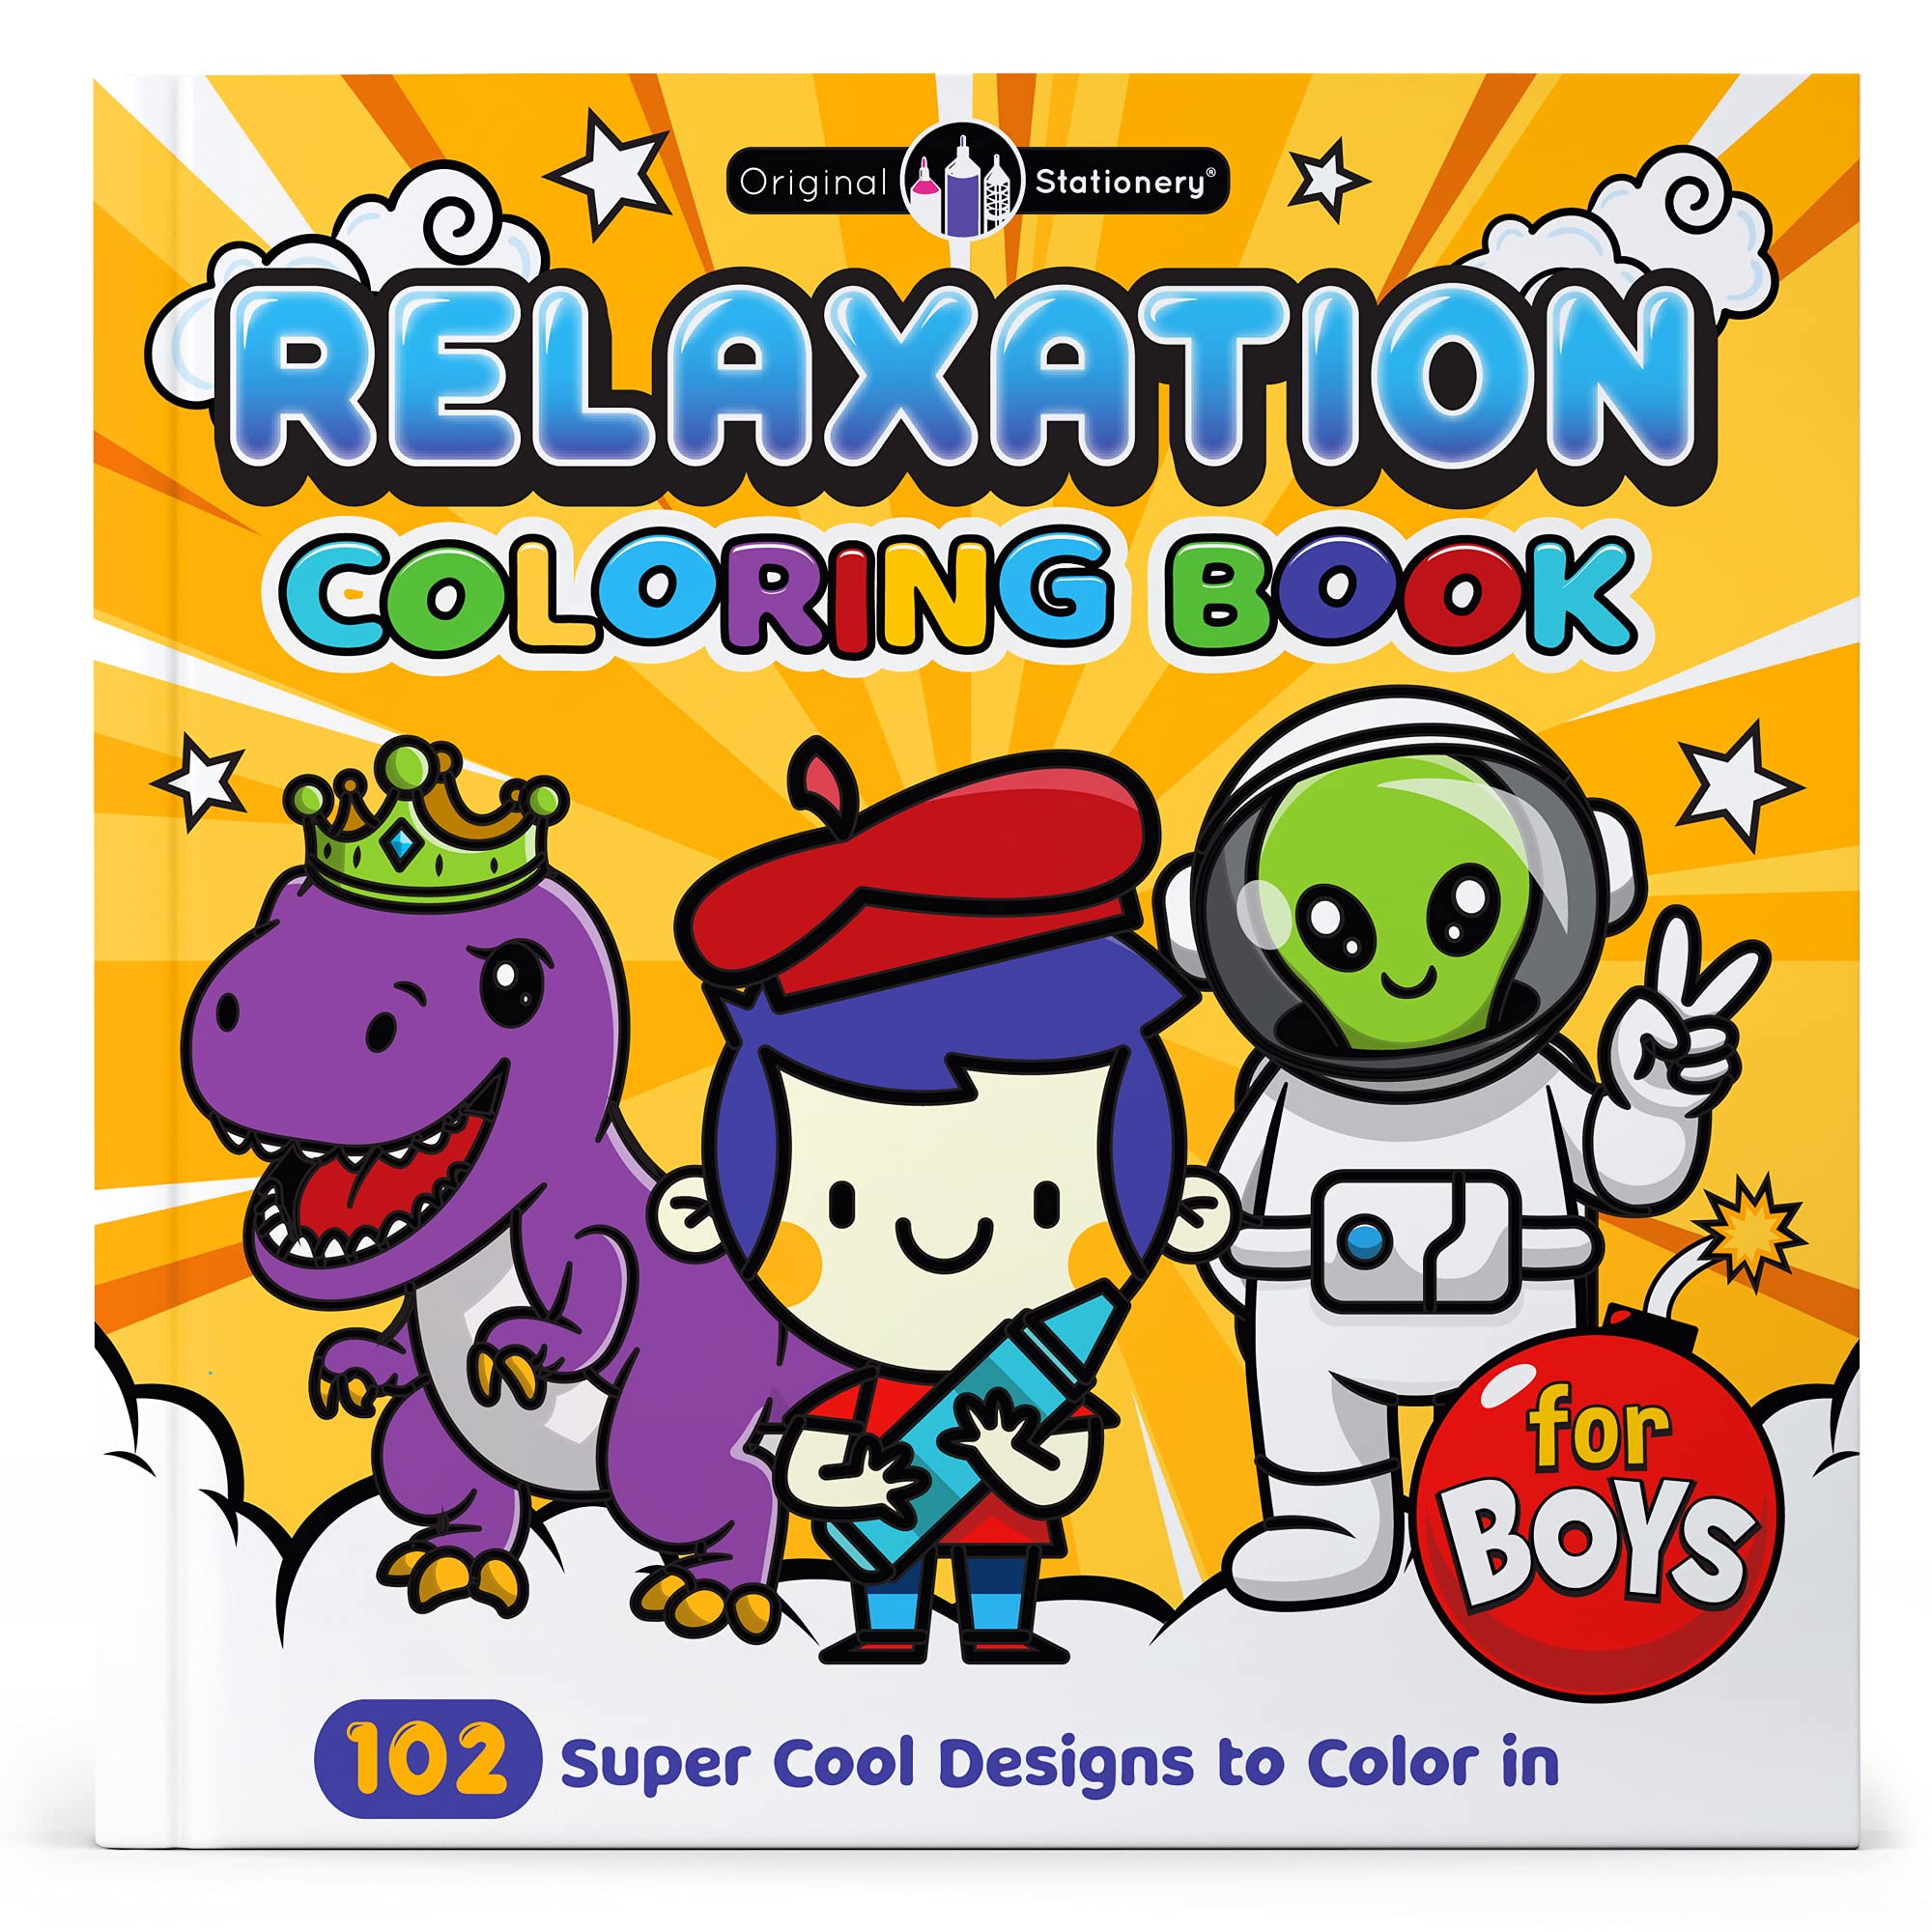 Original Stationery Arts and Crafts Coloring Book